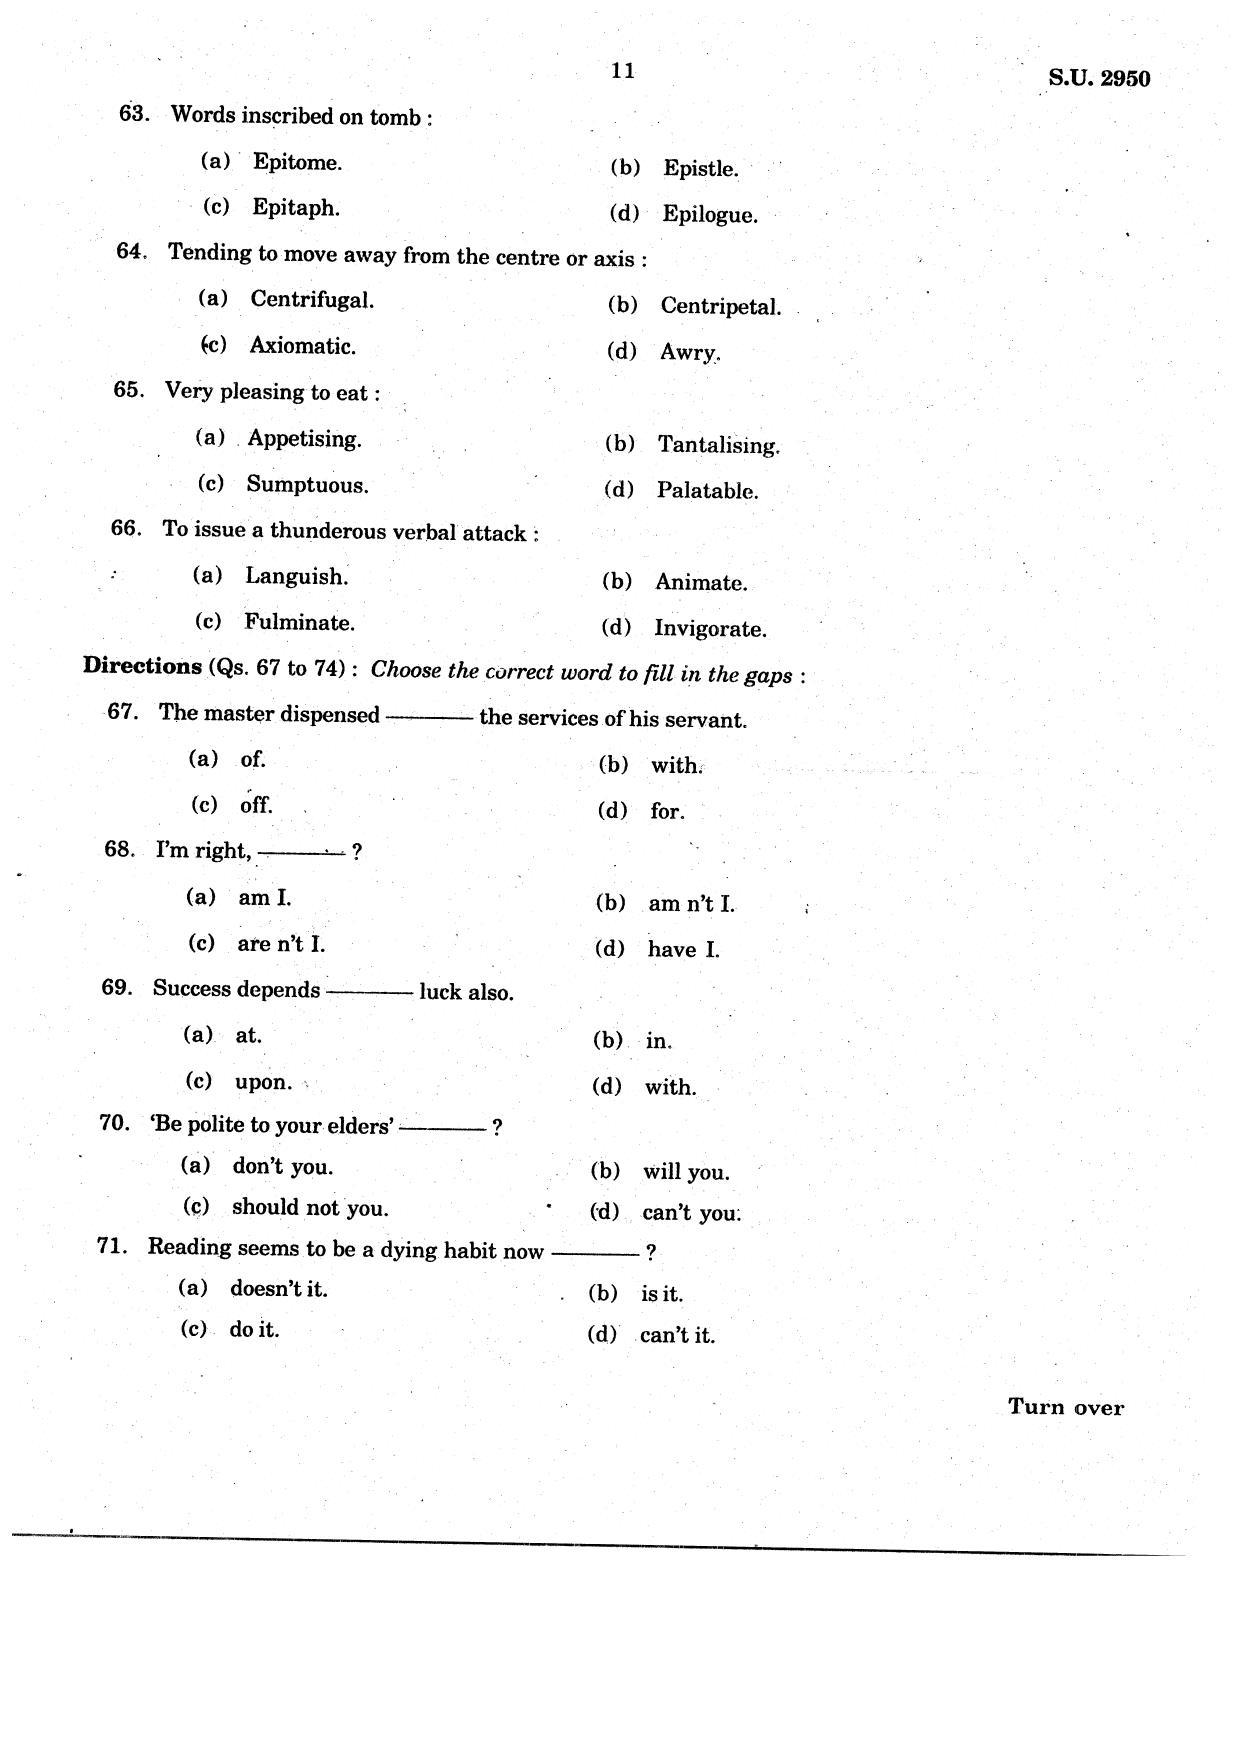 SSUS Entrance Exam MSW 2021 Question Paper - Page 11